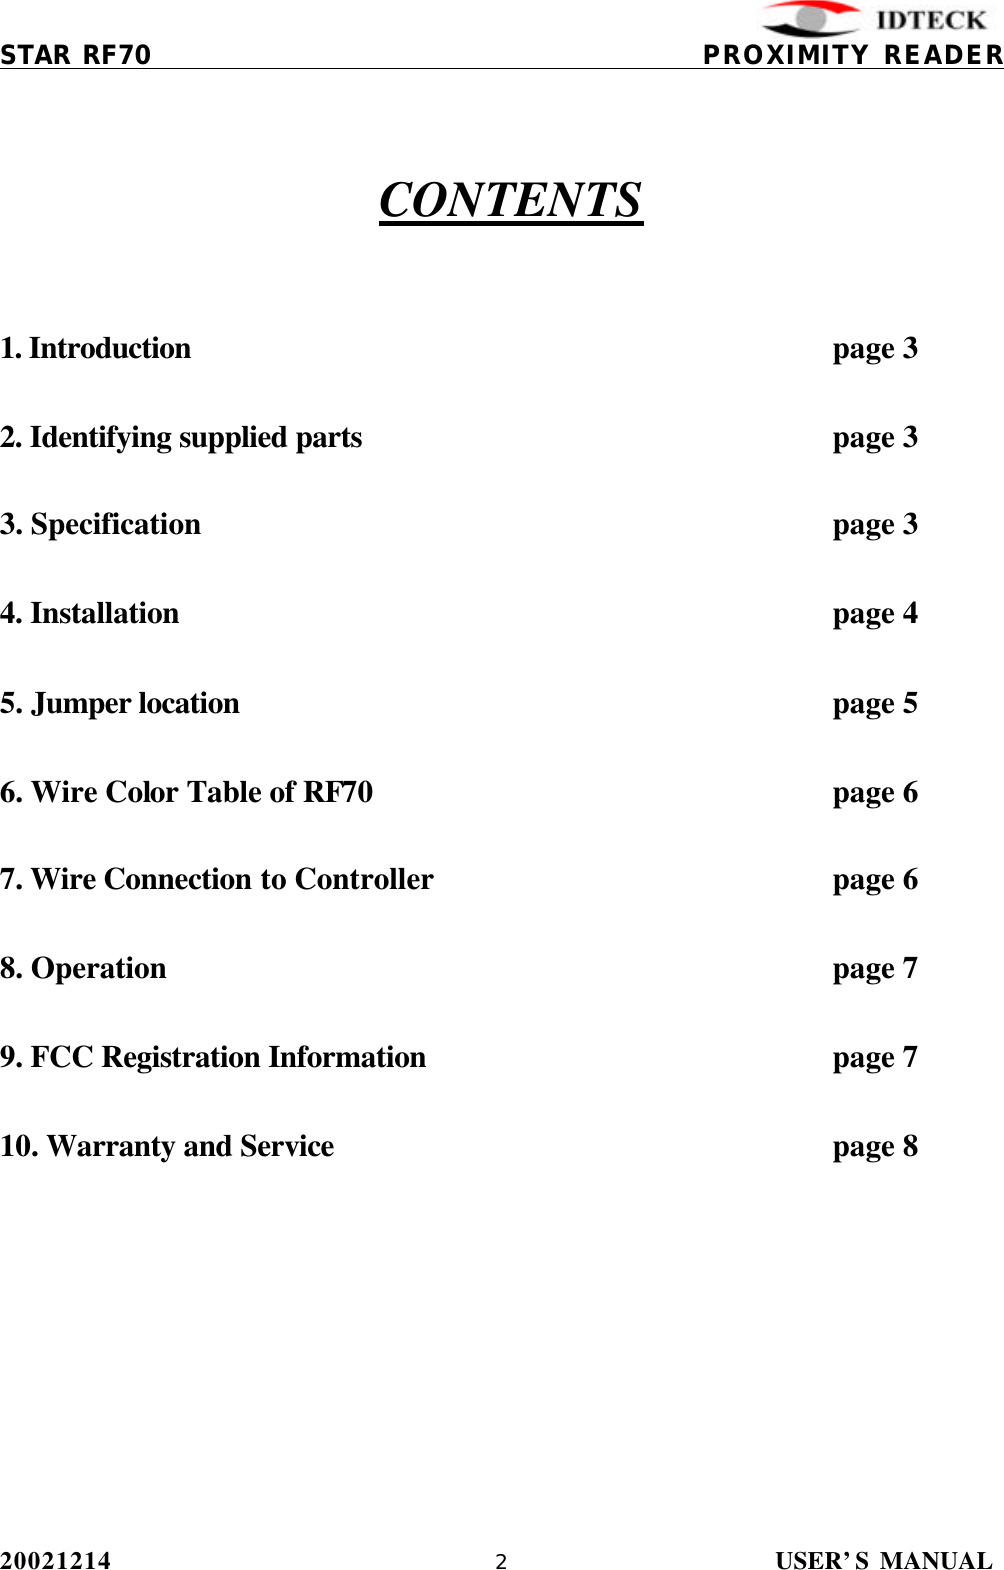          STAR RF70                                           PROXIMITY READER 20021214                USER’S MANUAL 2          CONTENTS   1. Introduction                  page 3  2. Identifying supplied parts              page 3  3. Specification                page 3  4. Installation                page 4  5. Jumper location         page 5  6. Wire Color Table of RF70            page 6  7. Wire Connection to Controller     page 6  8. Operation        page 7  9. FCC Registration Information     page 7  10. Warranty and Service      page 8  